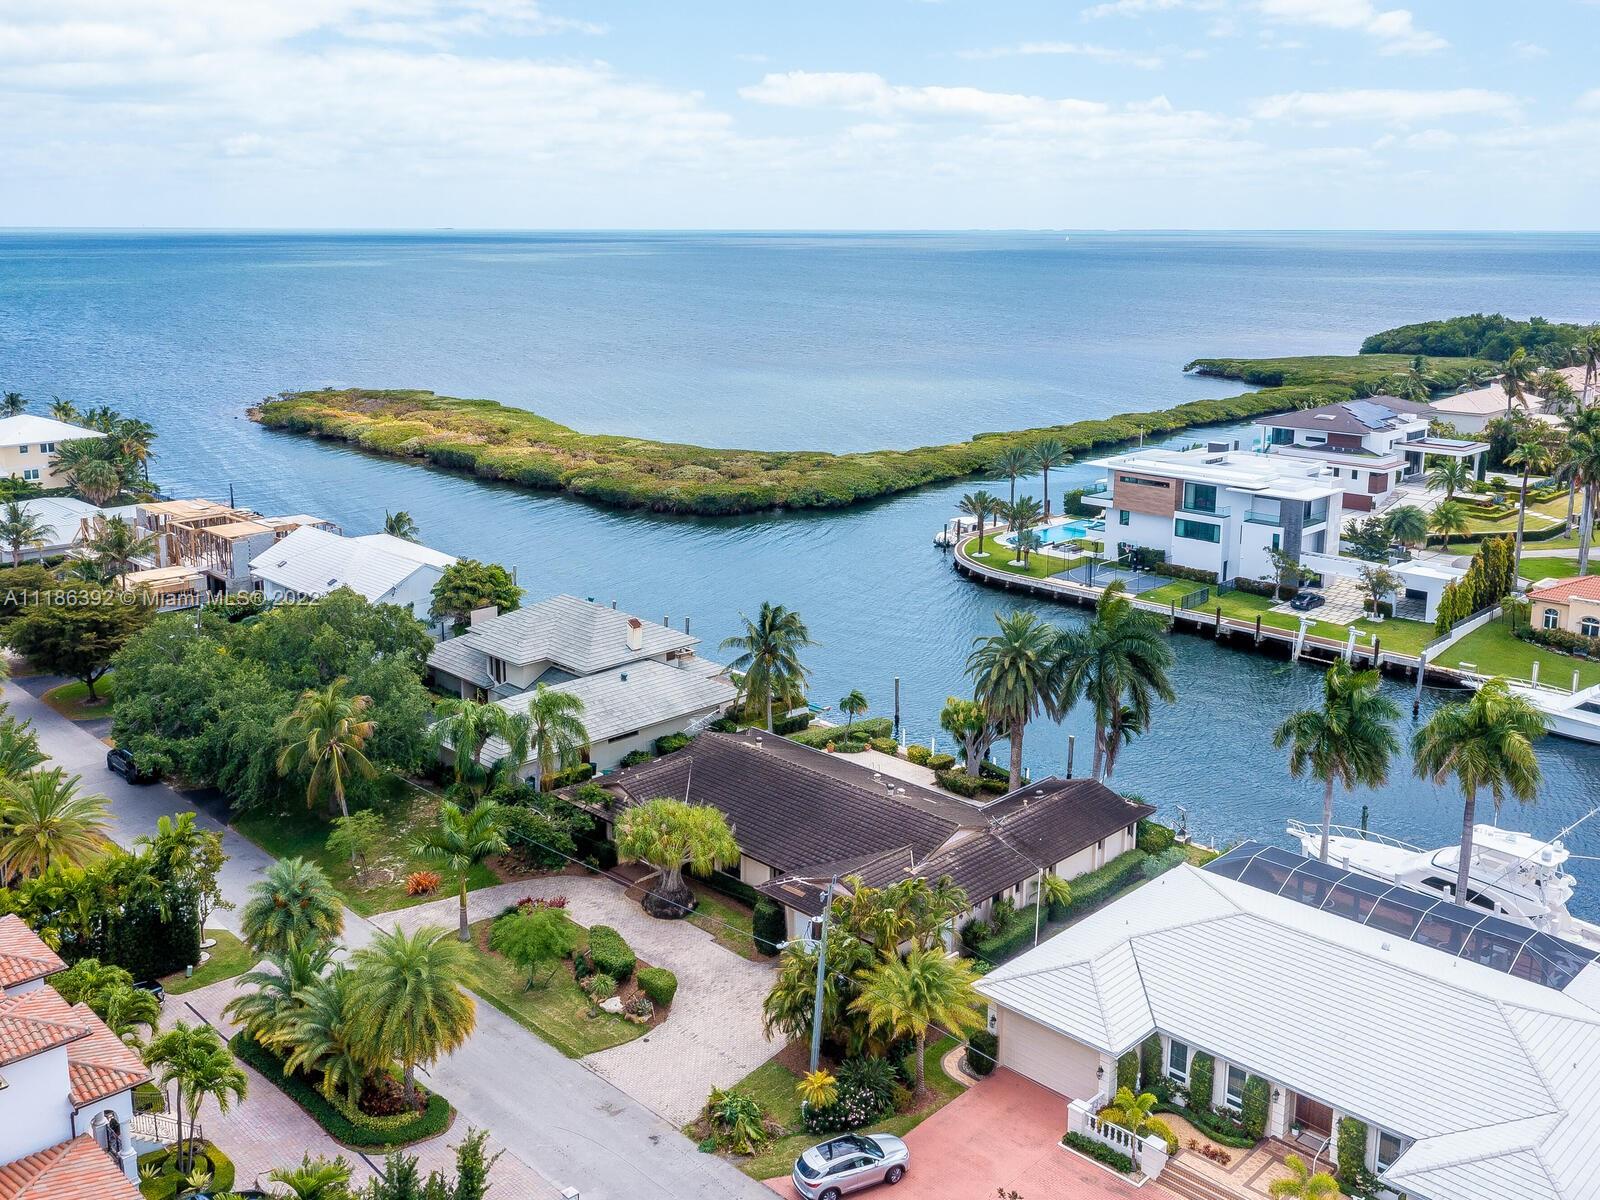 The 8th house from the point on the desirable San Pedro south wide waterway w/immediate & direct ocean access and outstanding views of Biscayne Bay! Private 100' seawall on protected canal makes yachting to the Florida Keys fun and easy. First time on the market 1970's Ken Parker original 3BD 2.5BA single story pool home w/rare 12'11" elevation provides renovation opportunity or build brand new for even more dramatic ocean views! Volume ceilings, impact windows, newer 3-zone AC's, laundry room, pantry and 2-car garage.  Gables by the Sea off Old Cutler Rd offers the finest schools in a safe, family friendly guard-gated community that's pedestrian, bicycle & golf cart friendly w/a neighborhood park & easy access to Pinecrest Gardens, Fairchild Gardens, Matheson Hammock & Deering Estate.A++